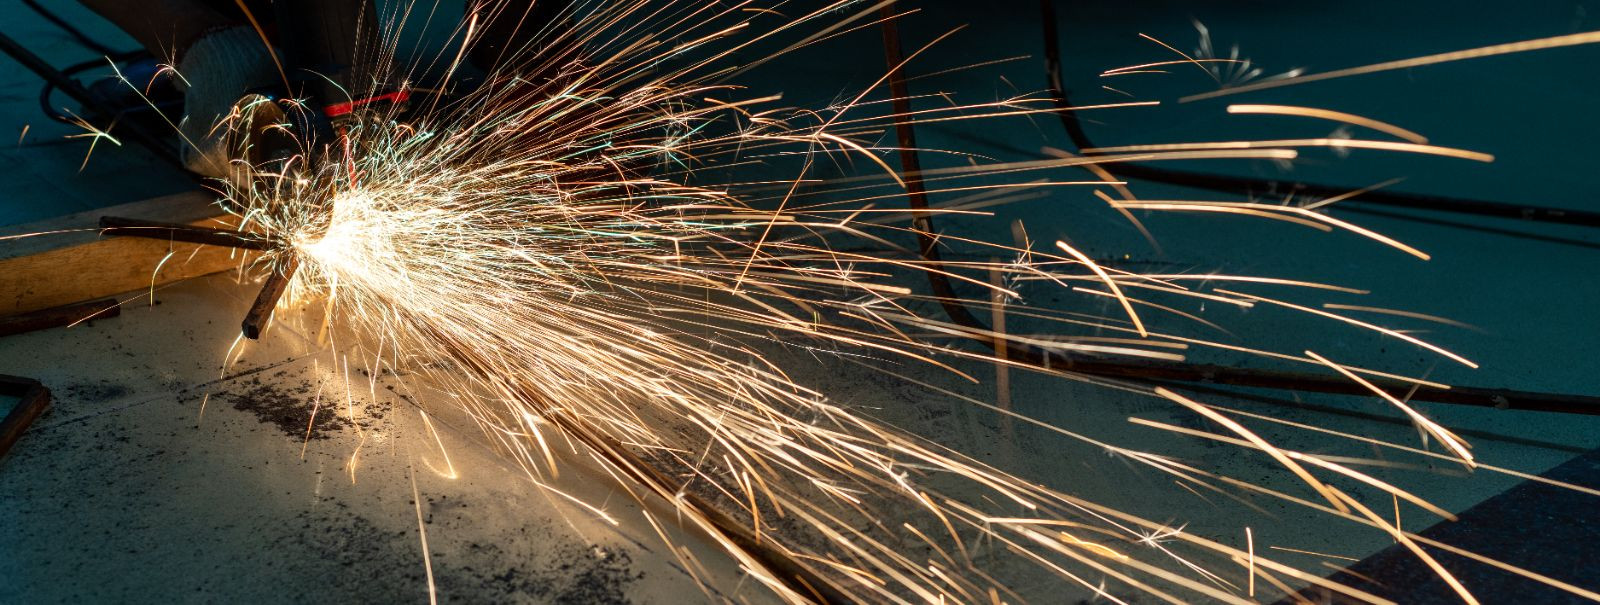 The metal fabrication industry is undergoing a transformation, driven by technological advancements and evolving market demands. As a leader in the field, SAKK 